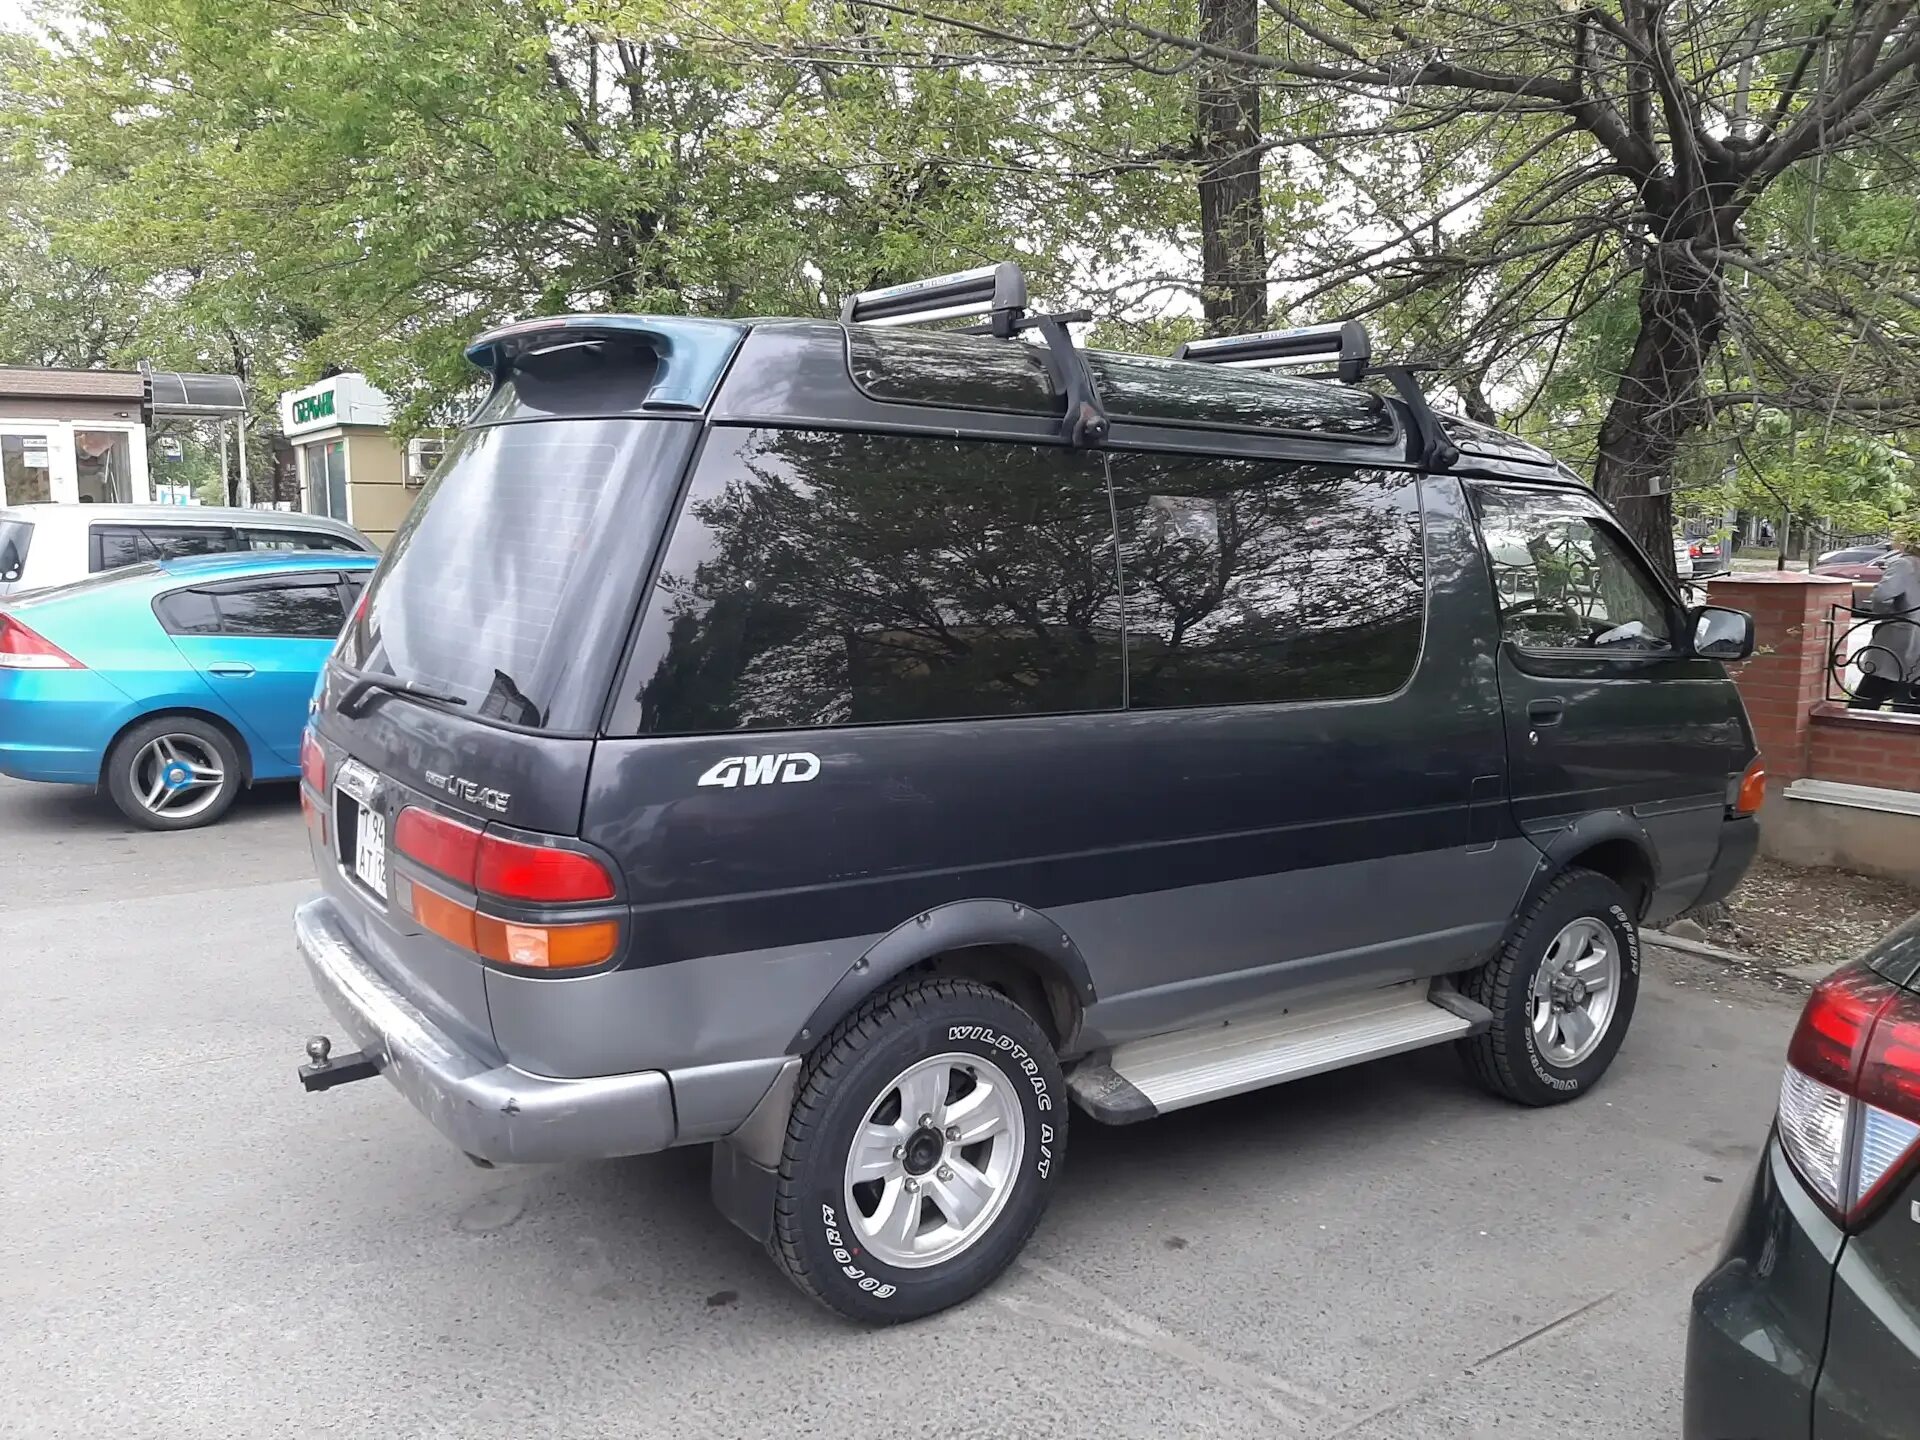 Тойота Town Ace 1996. Toyota Town Ace cr30. Toyota Town Ace 1996 Tuning. Toyota Town Ace (3g).